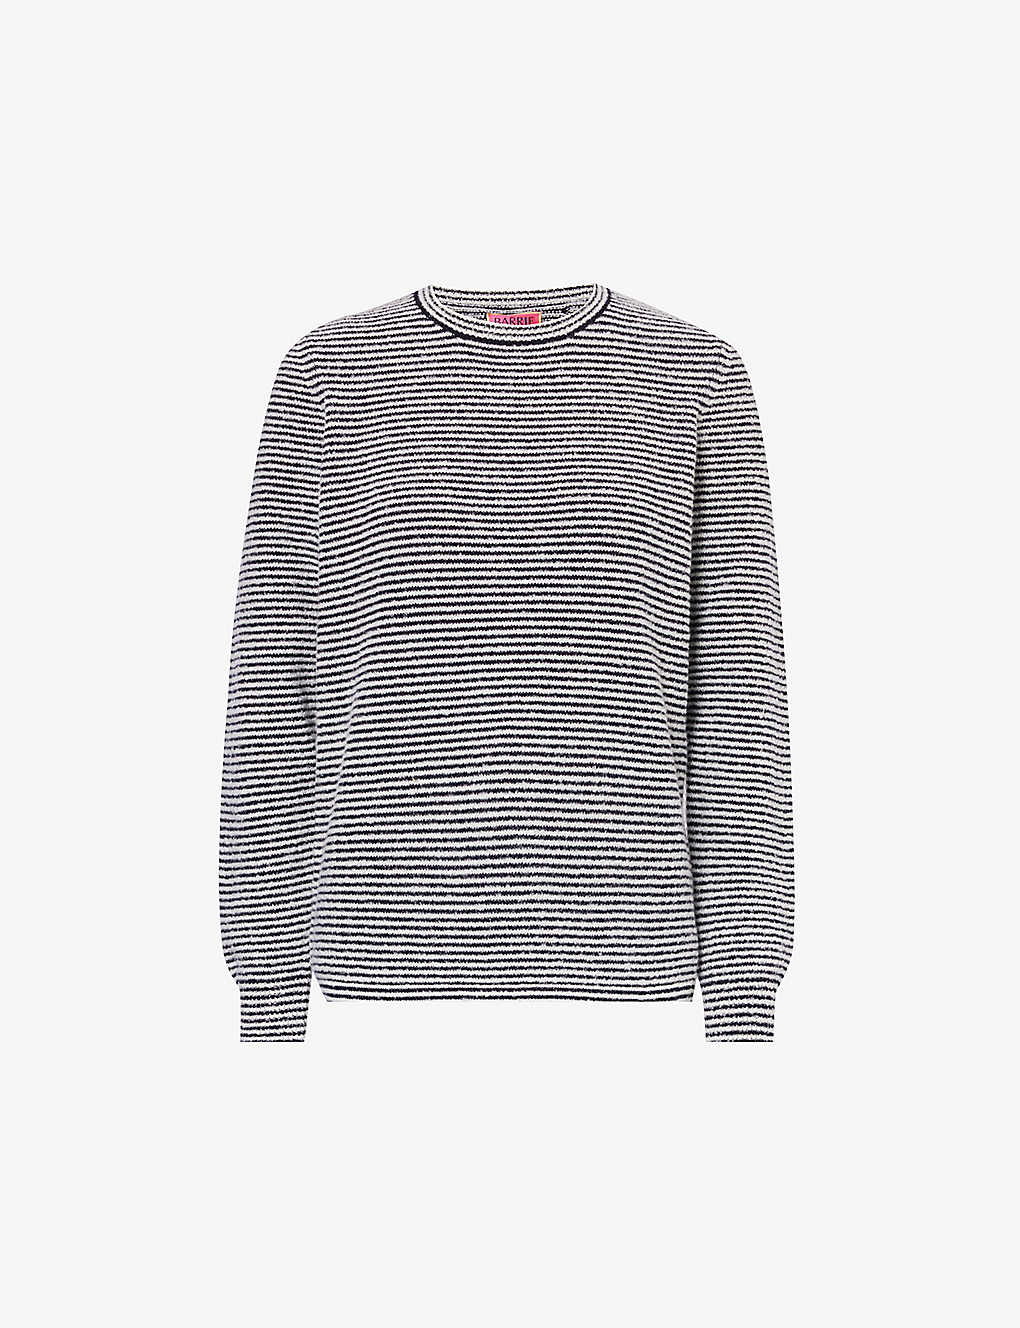 BARRIE BARRIE X SOFIA COPPOLA STRIPED CASHMERE, WOOL AND SILK-BLEND JUMPER